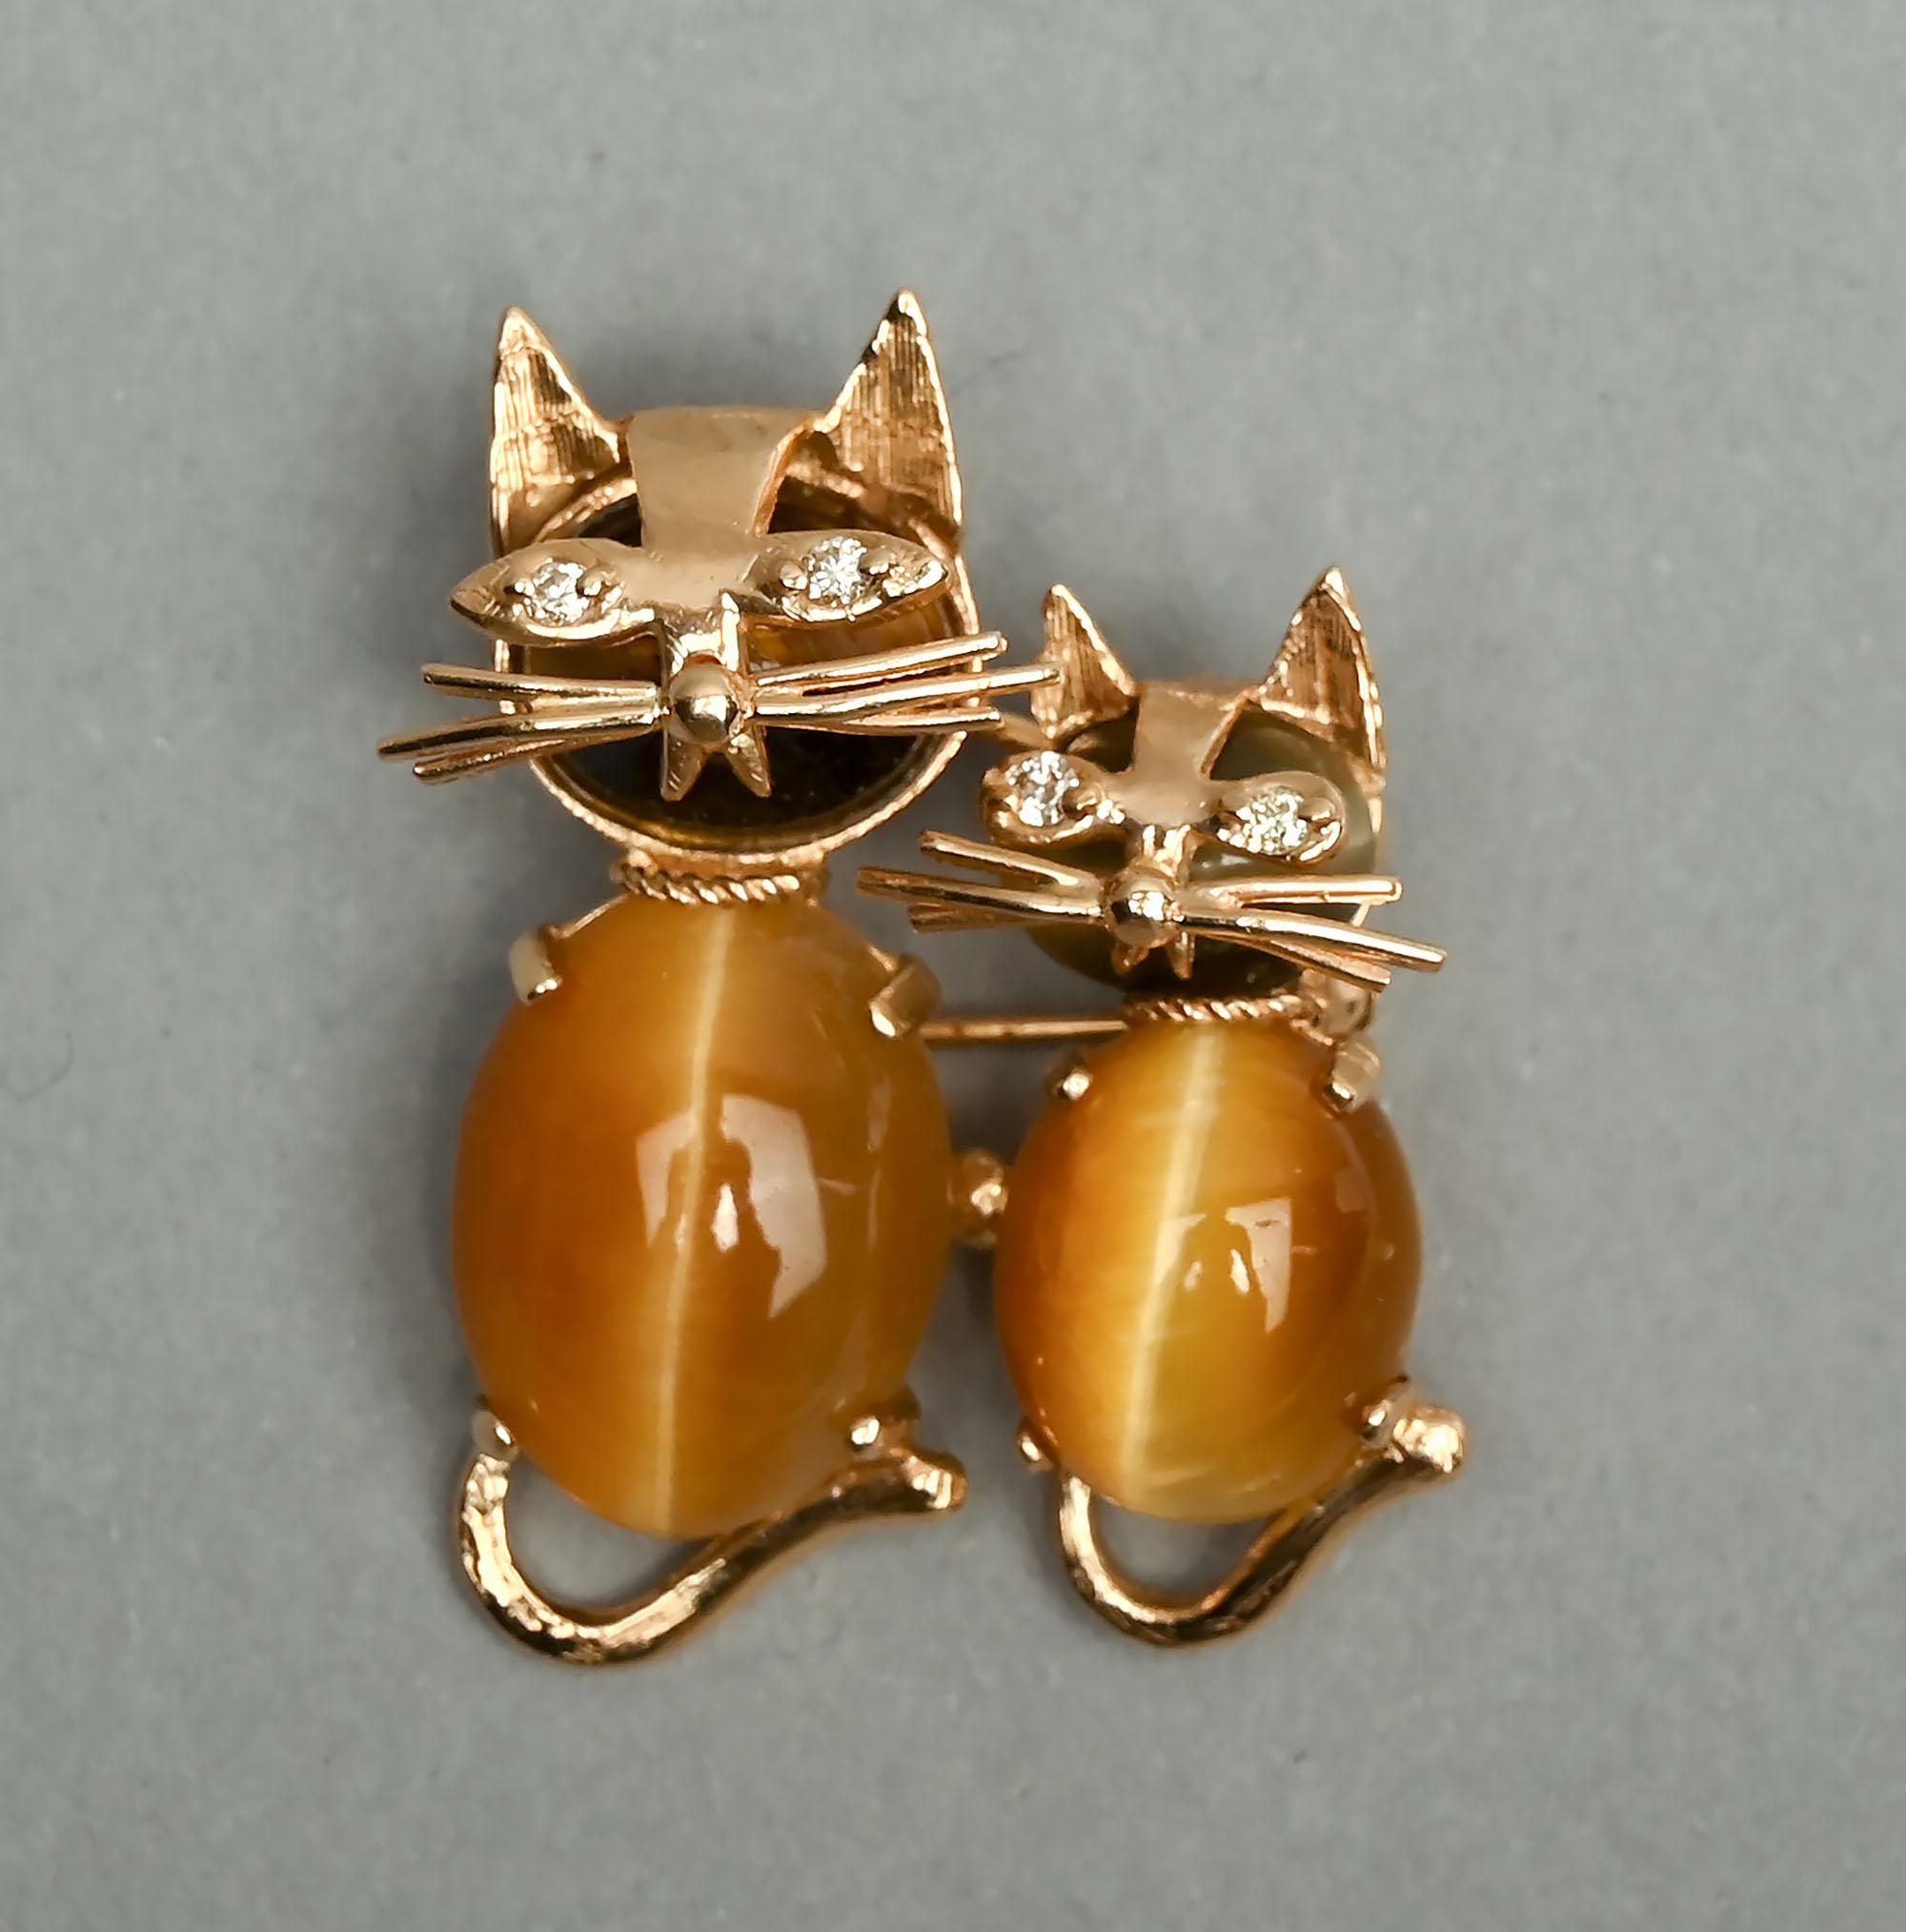 Two adorable kitties can be worn as either a brooch or a pendant. In addition to the pin stem, the back has a small loop from which one can attach a chain. The larger cat measures 1 1/4 